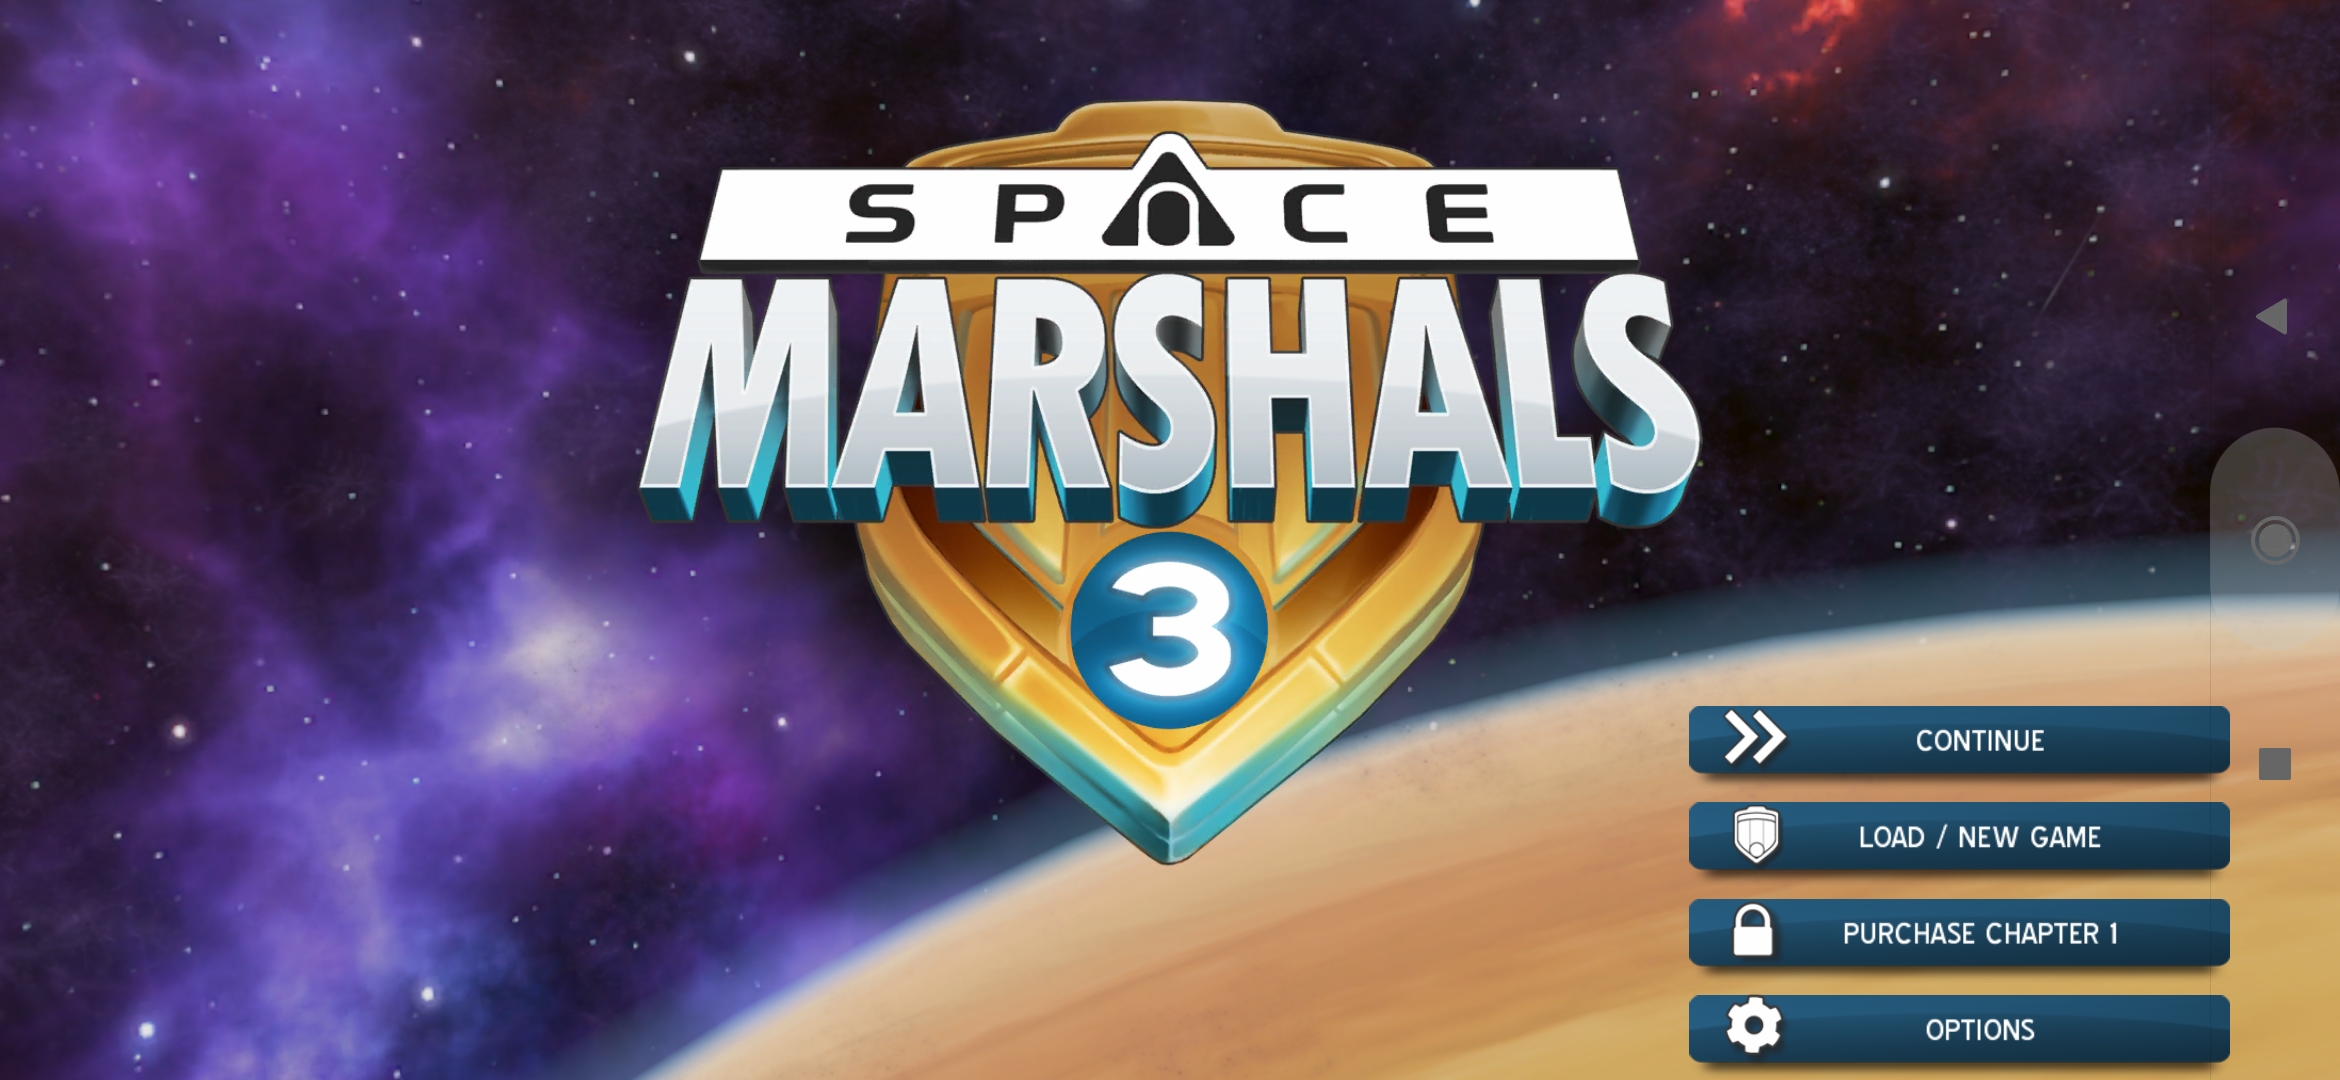 [Game Android] Space Marshals 3